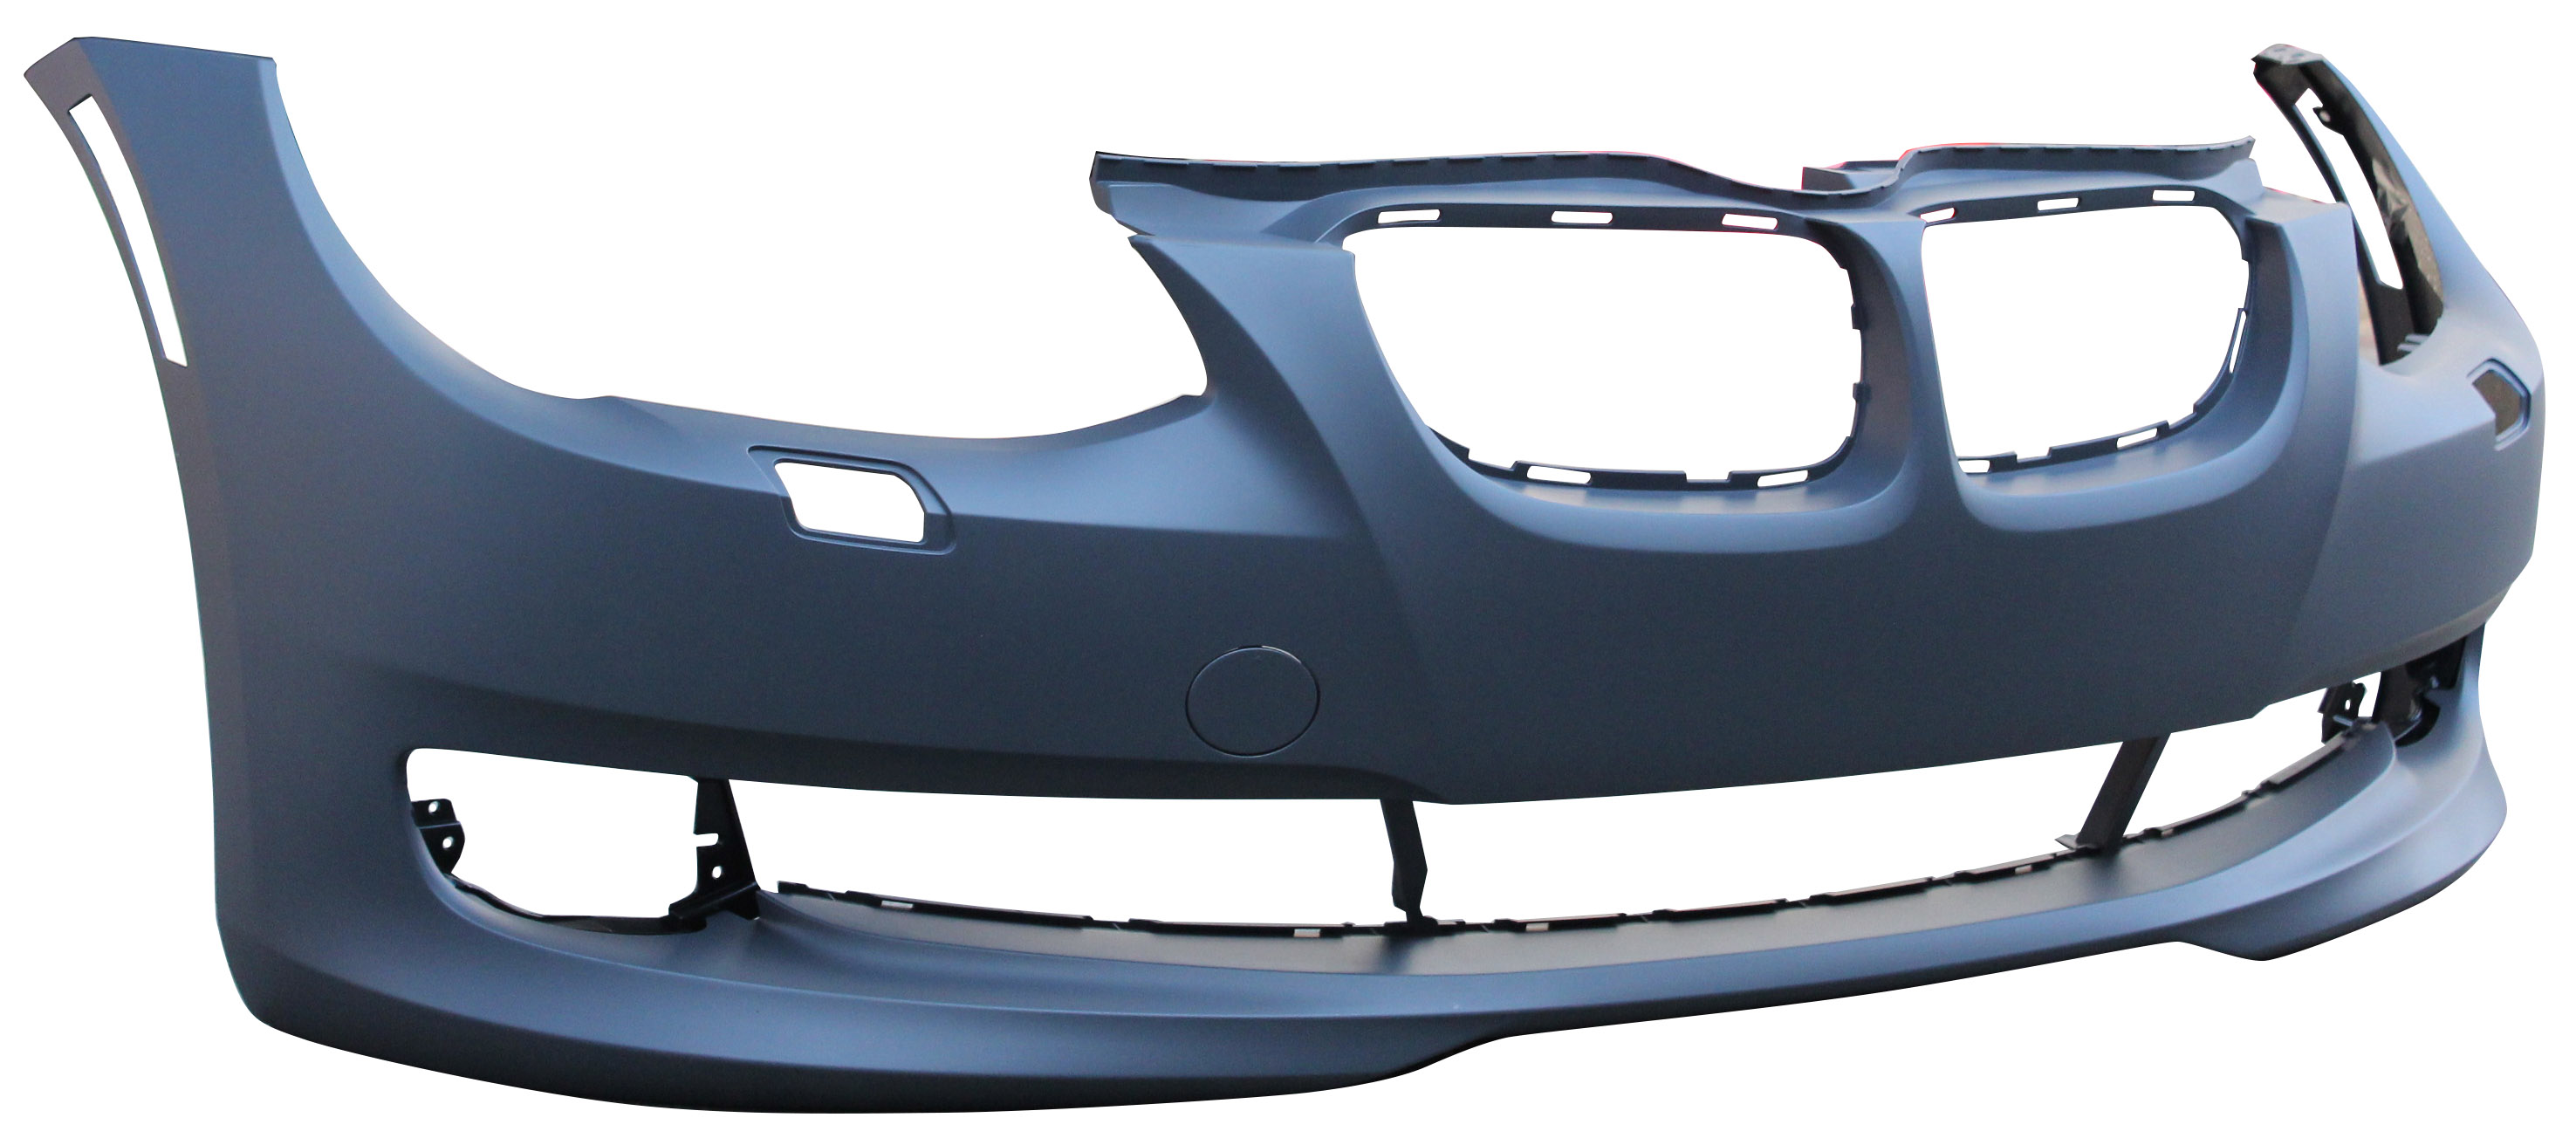 Aftermarket BUMPER COVERS for BMW - 335I, 335i,11-13,Front bumper cover